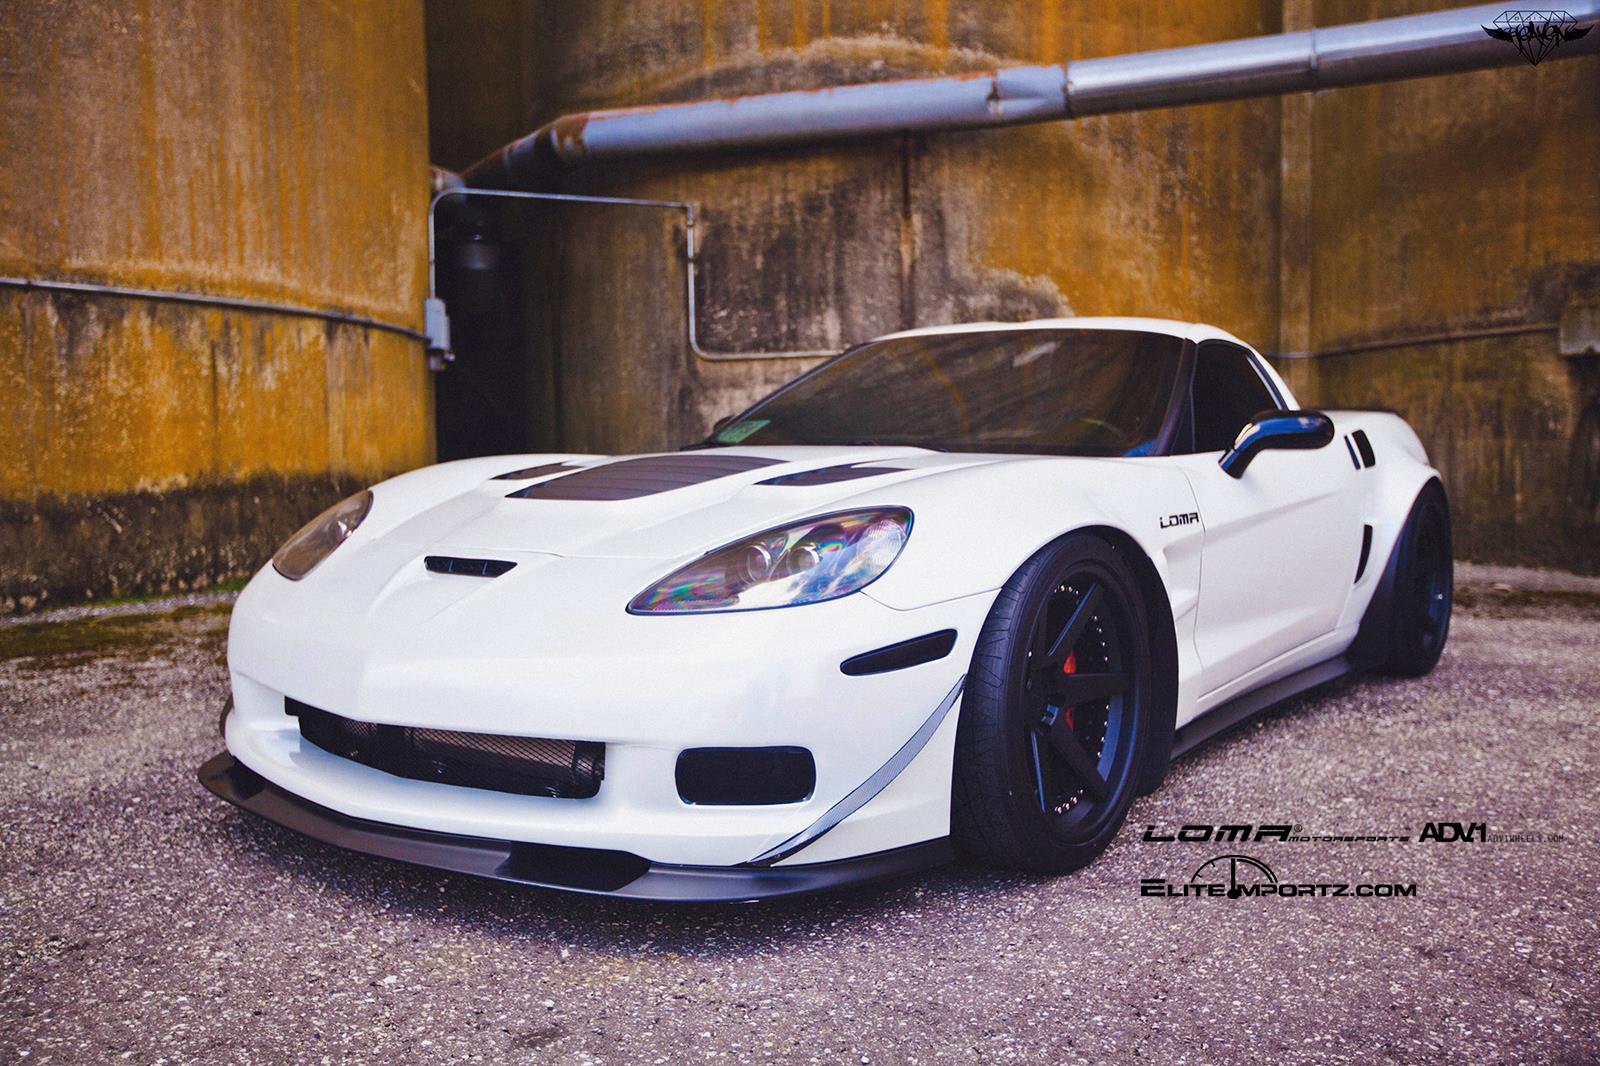 White Chevy Corvette with Custom Vented Hood - Photo by ADV.1